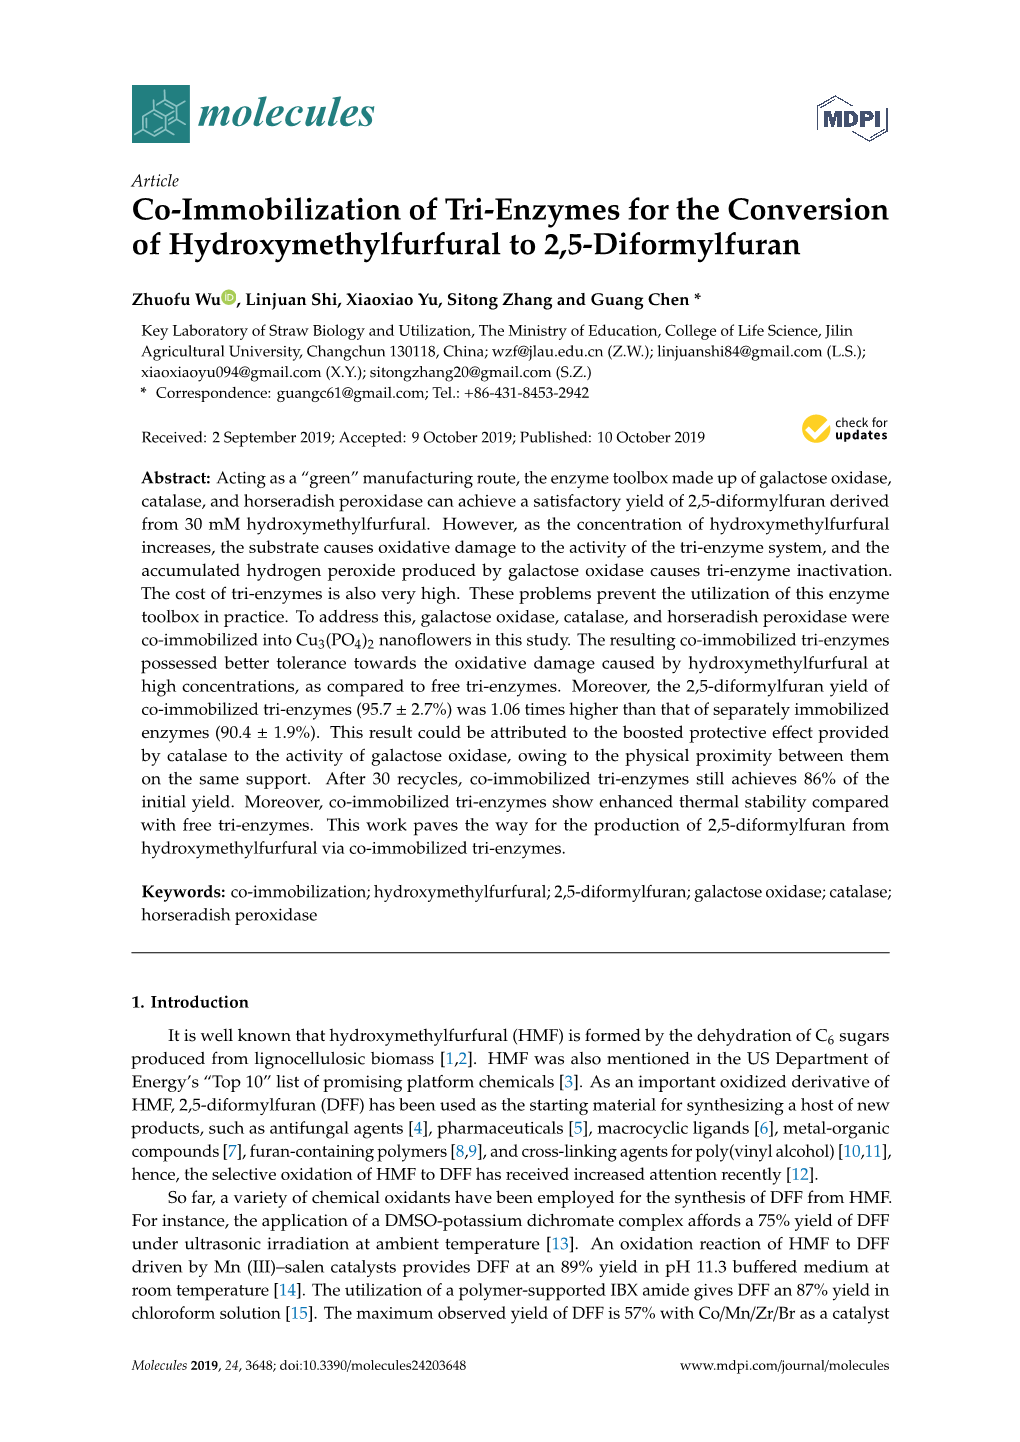 Co-Immobilization of Tri-Enzymes for the Conversion of Hydroxymethylfurfural to 2,5-Diformylfuran